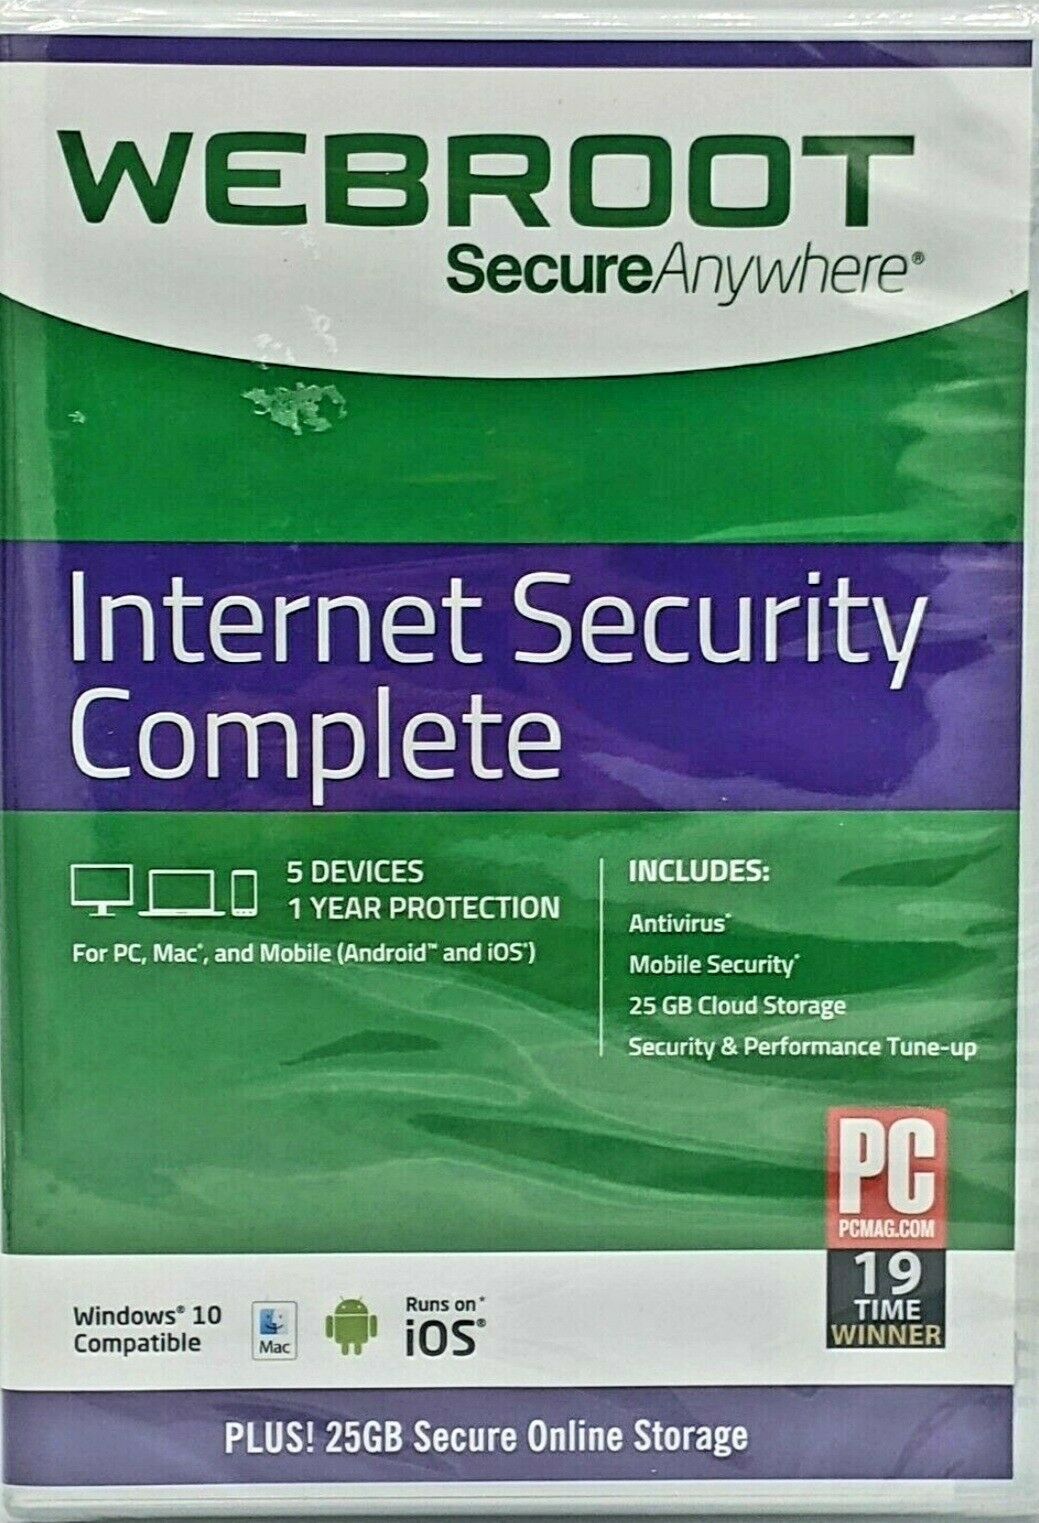 webroot secureanywhere internet security complete 2014 reviews